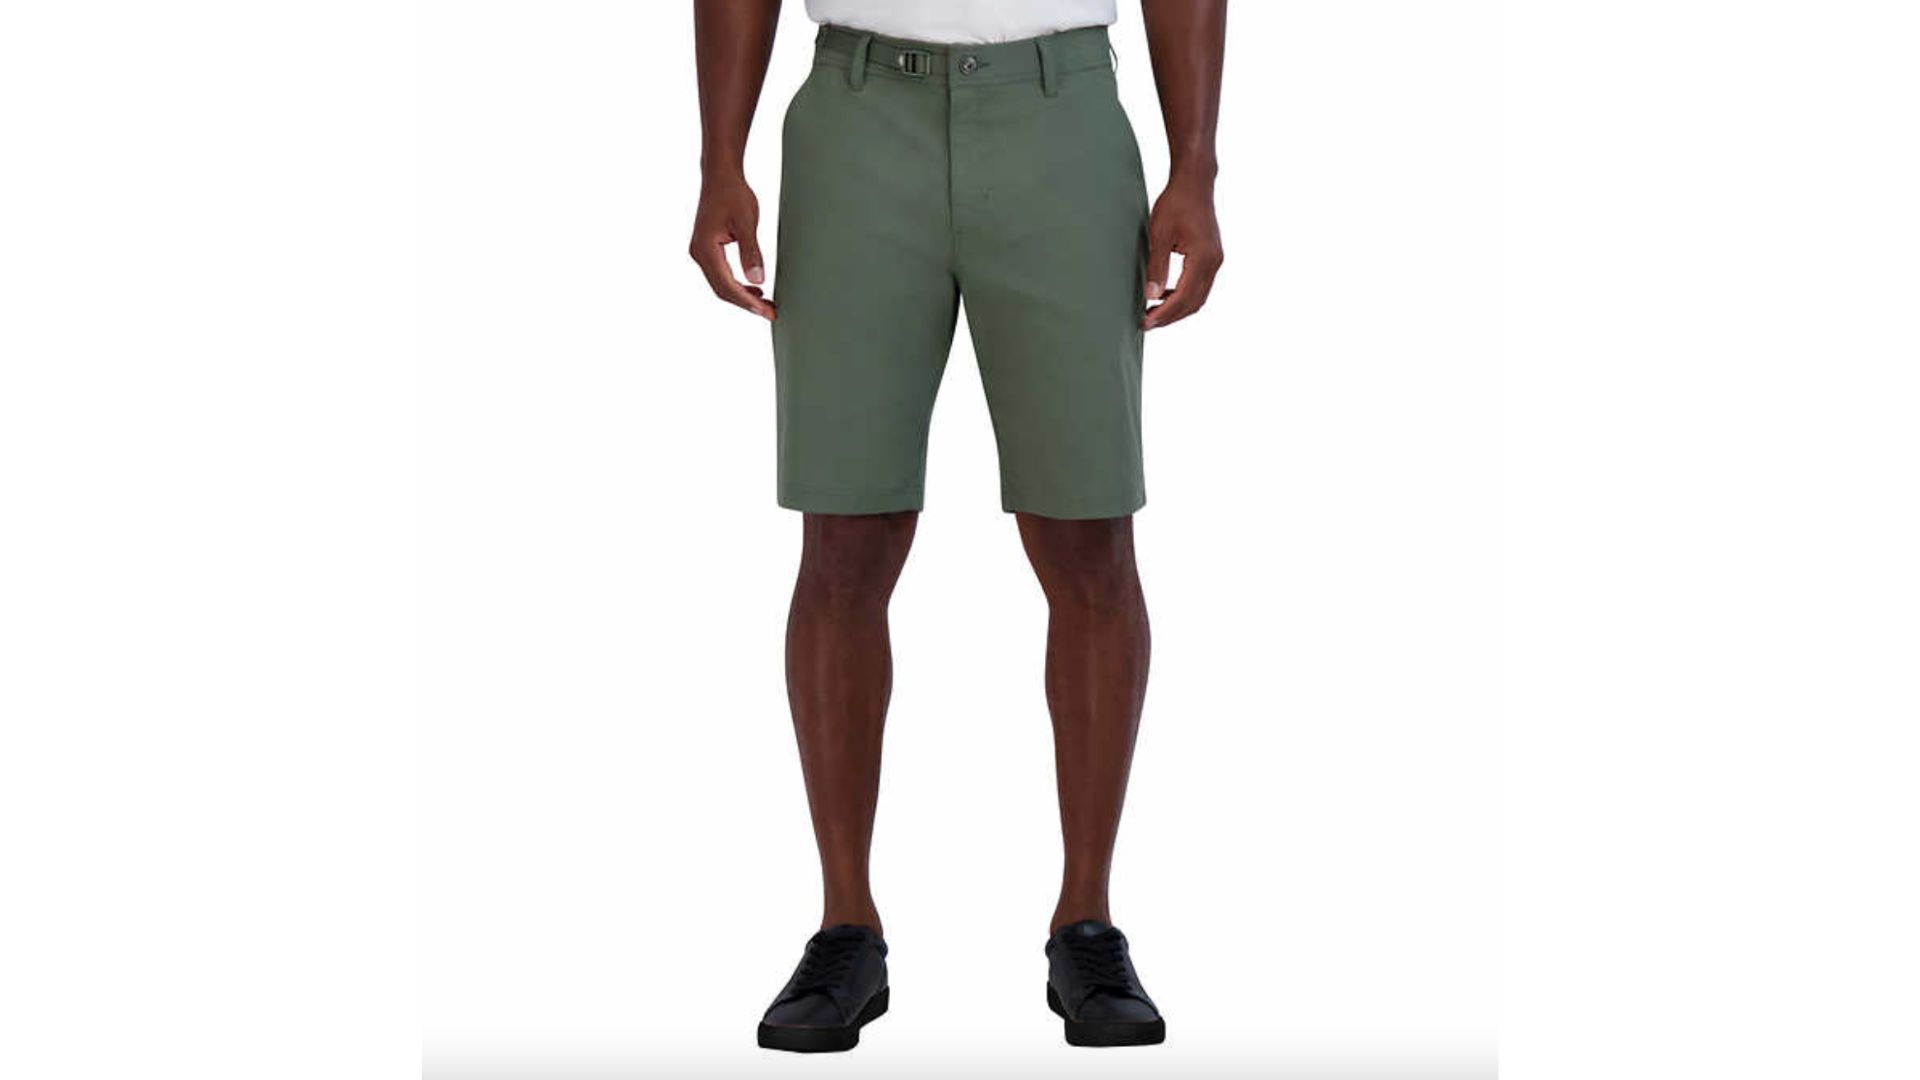 <ul> <li><strong>Price:</strong> <a href="https://www.costco.com/gerry-mens-venture-short.product.4000026554.html" rel="noreferrer noopener">$11.99</a></li> </ul> <p>If you're searching for men's shorts with a built-in belt, these Gerry men's venture shorts are a great option. In addition to including a built-in belt, each pair also features a zippered side and back pocket.</p> <p>Costco members receive $4 off the original price of $15.99 when they shop these shorts. Pick from green, black and blue colors in various men's sizes.</p> <p><strong>Try This: <a href="https://www.gobankingrates.com/saving-money/shopping/things-you-should-always-buy-at-trader-joes/?utm_term=related_link_6&utm_campaign=1263709&utm_source=msn.com&utm_content=8&utm_medium=rss" rel="">10 Things You Should Always Buy at Trader Joe's</a></strong></p>